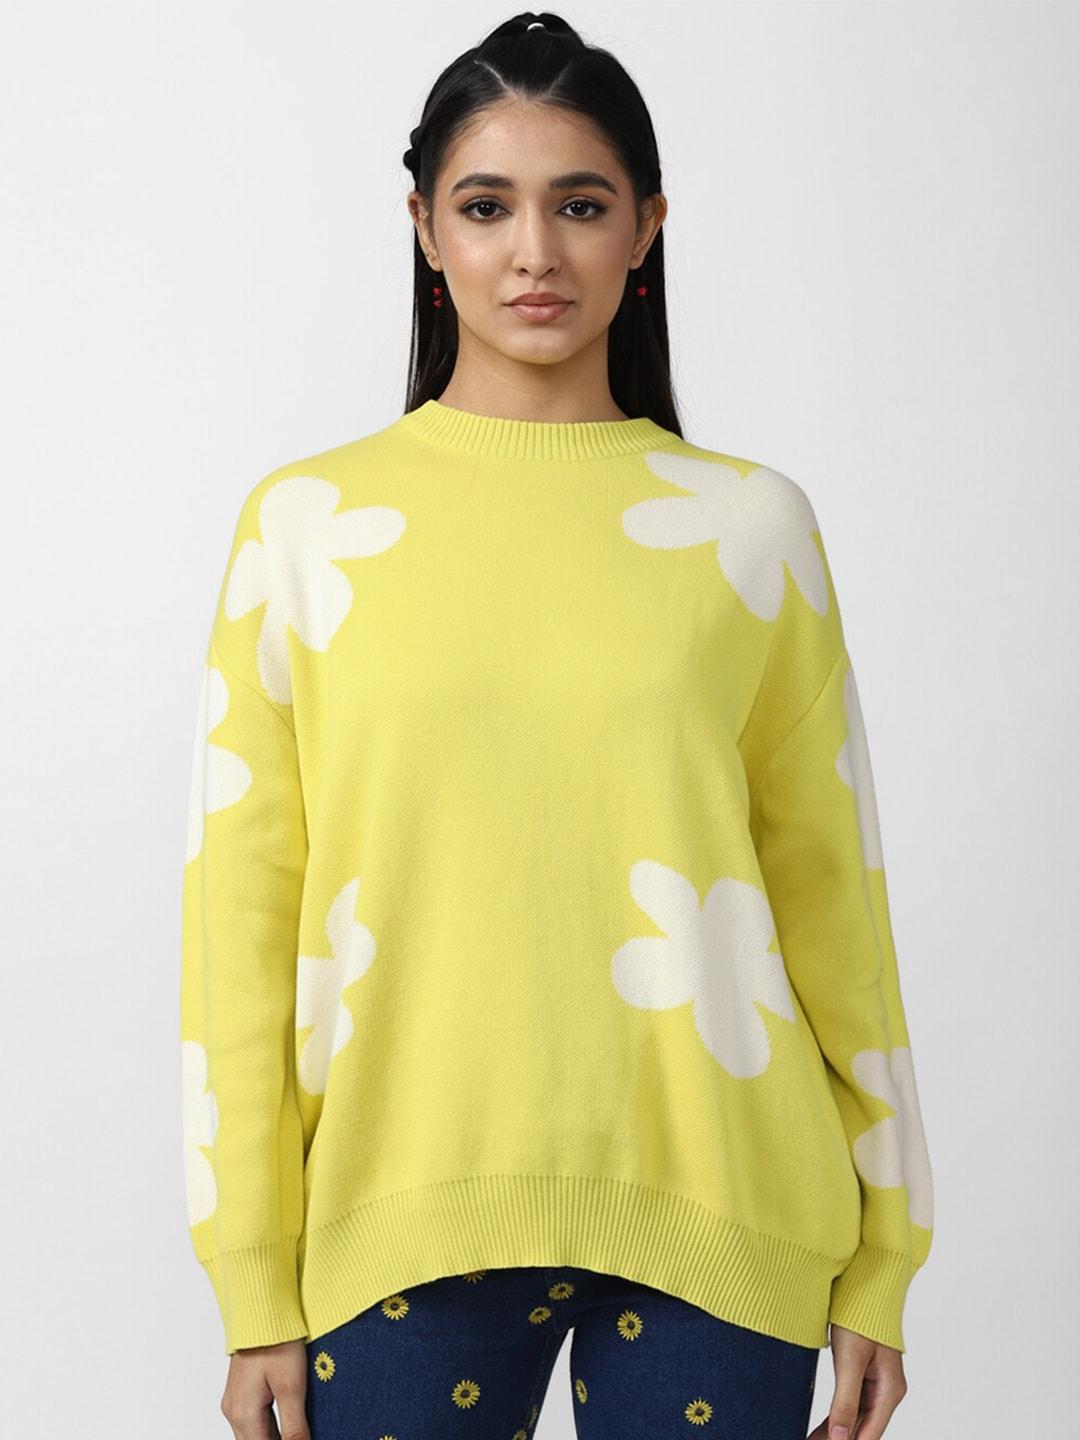 FOREVER 21 Women Yellow & White Floral Printed Pullover